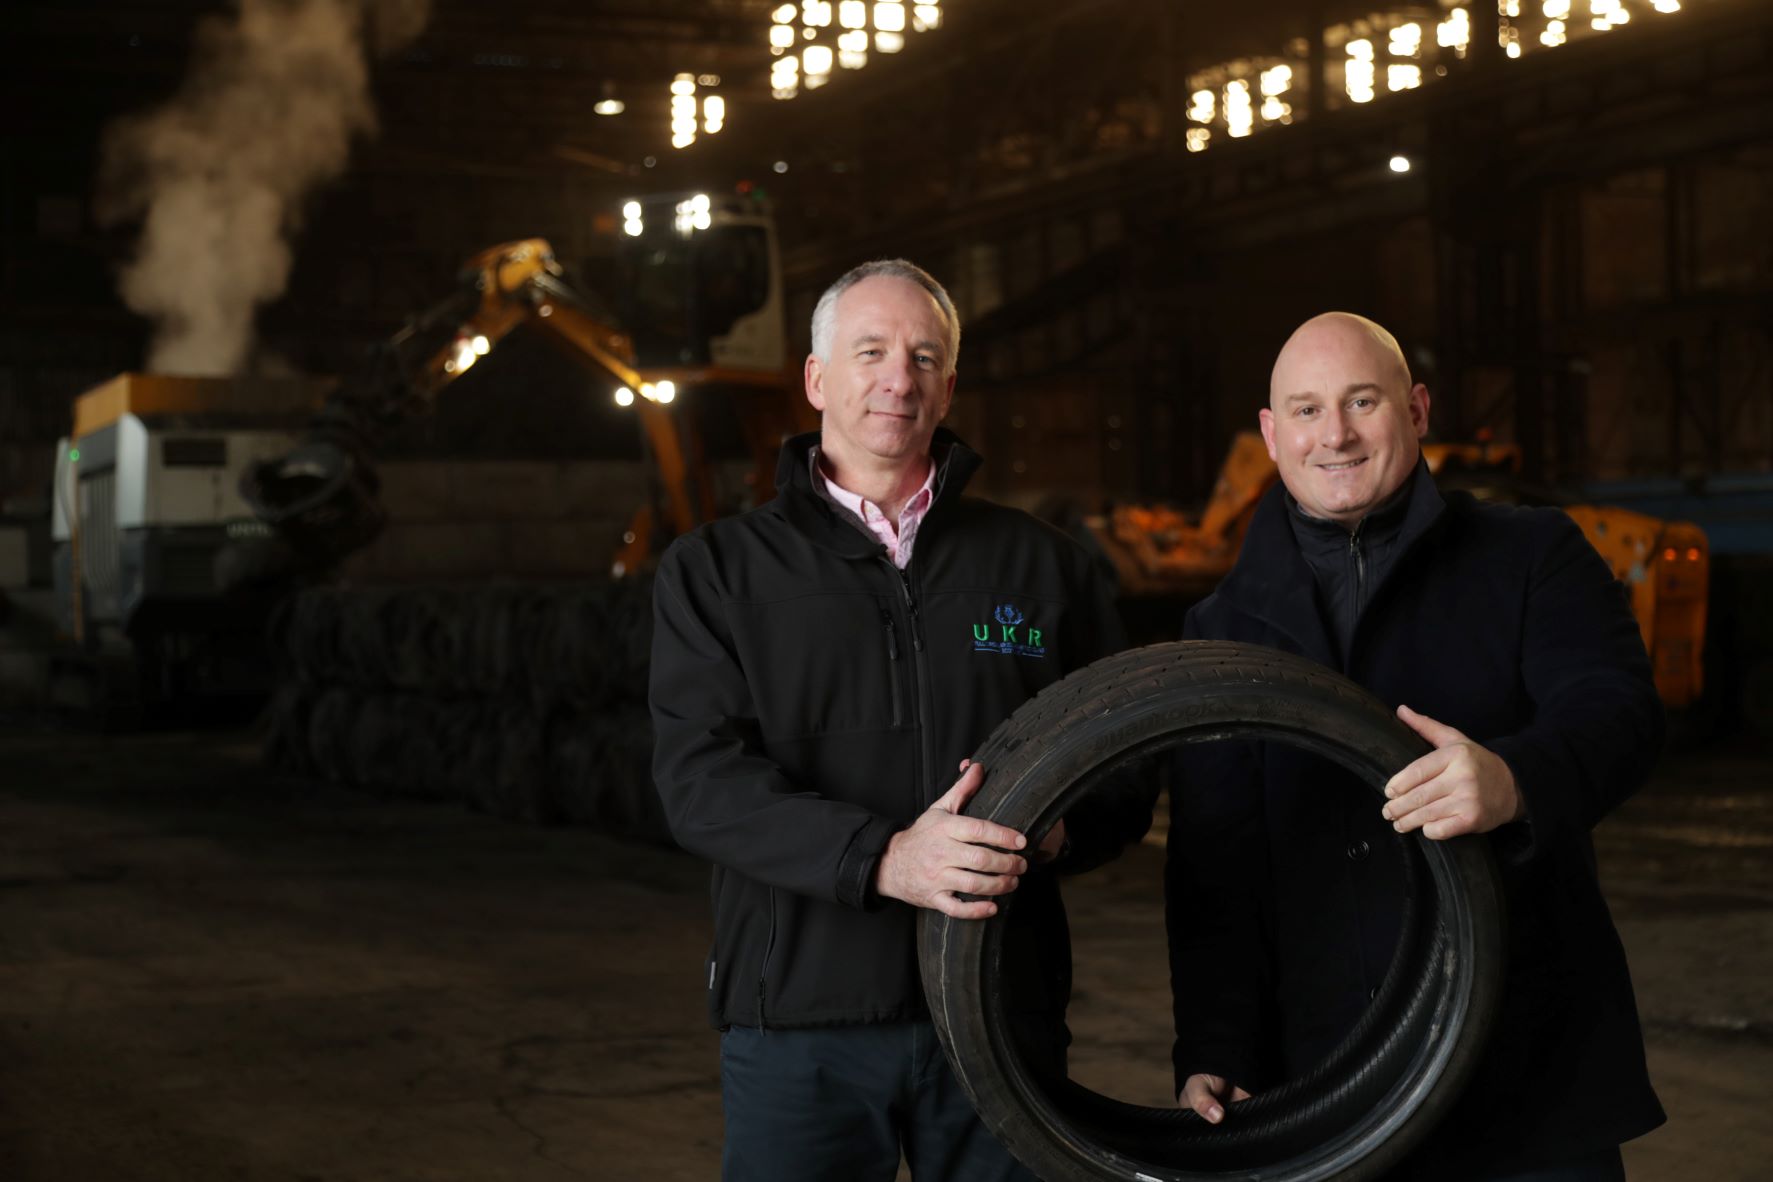 Scottish tyre recycling business secures £370,000 funding deal